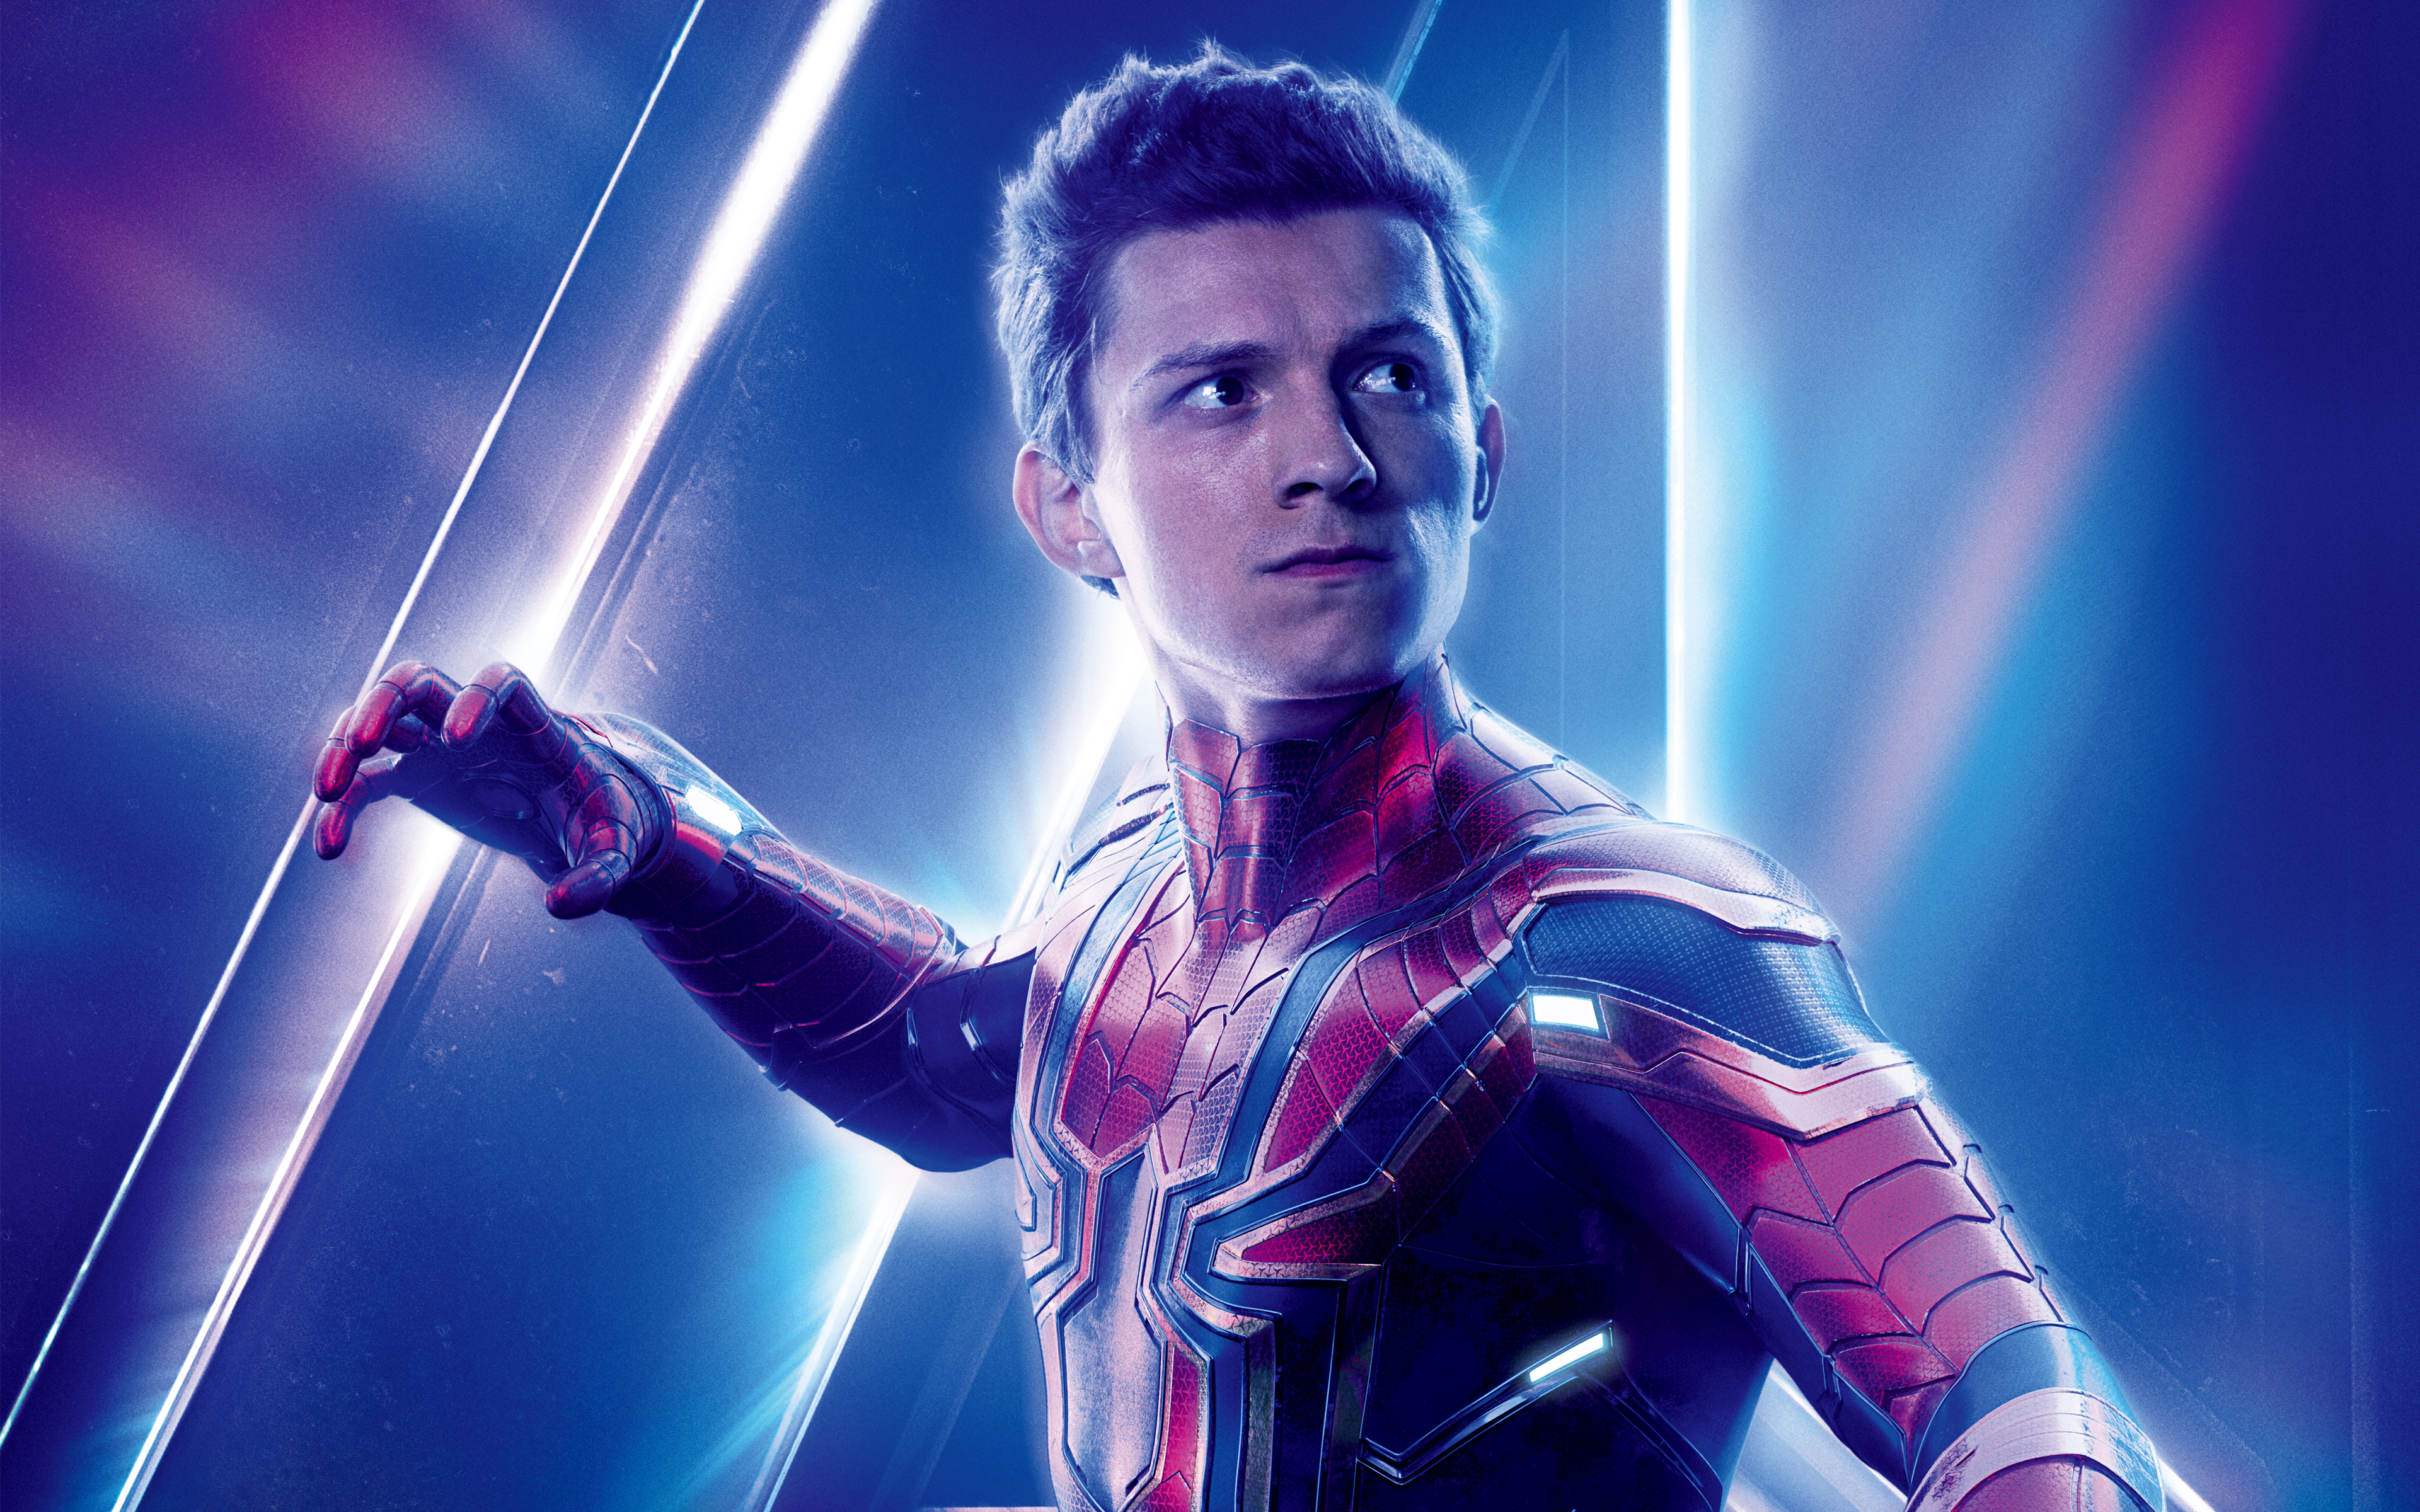 Tom Holland as Spider Man Avengers Infinity War 4K 8K5584419540 - Tom Holland as Spider Man Avengers Infinity War 4K 8K - War, Tom Holland, Tom, Spider Man, Infinity War, Infinity, Holland, Avengers Infinity War, Avengers